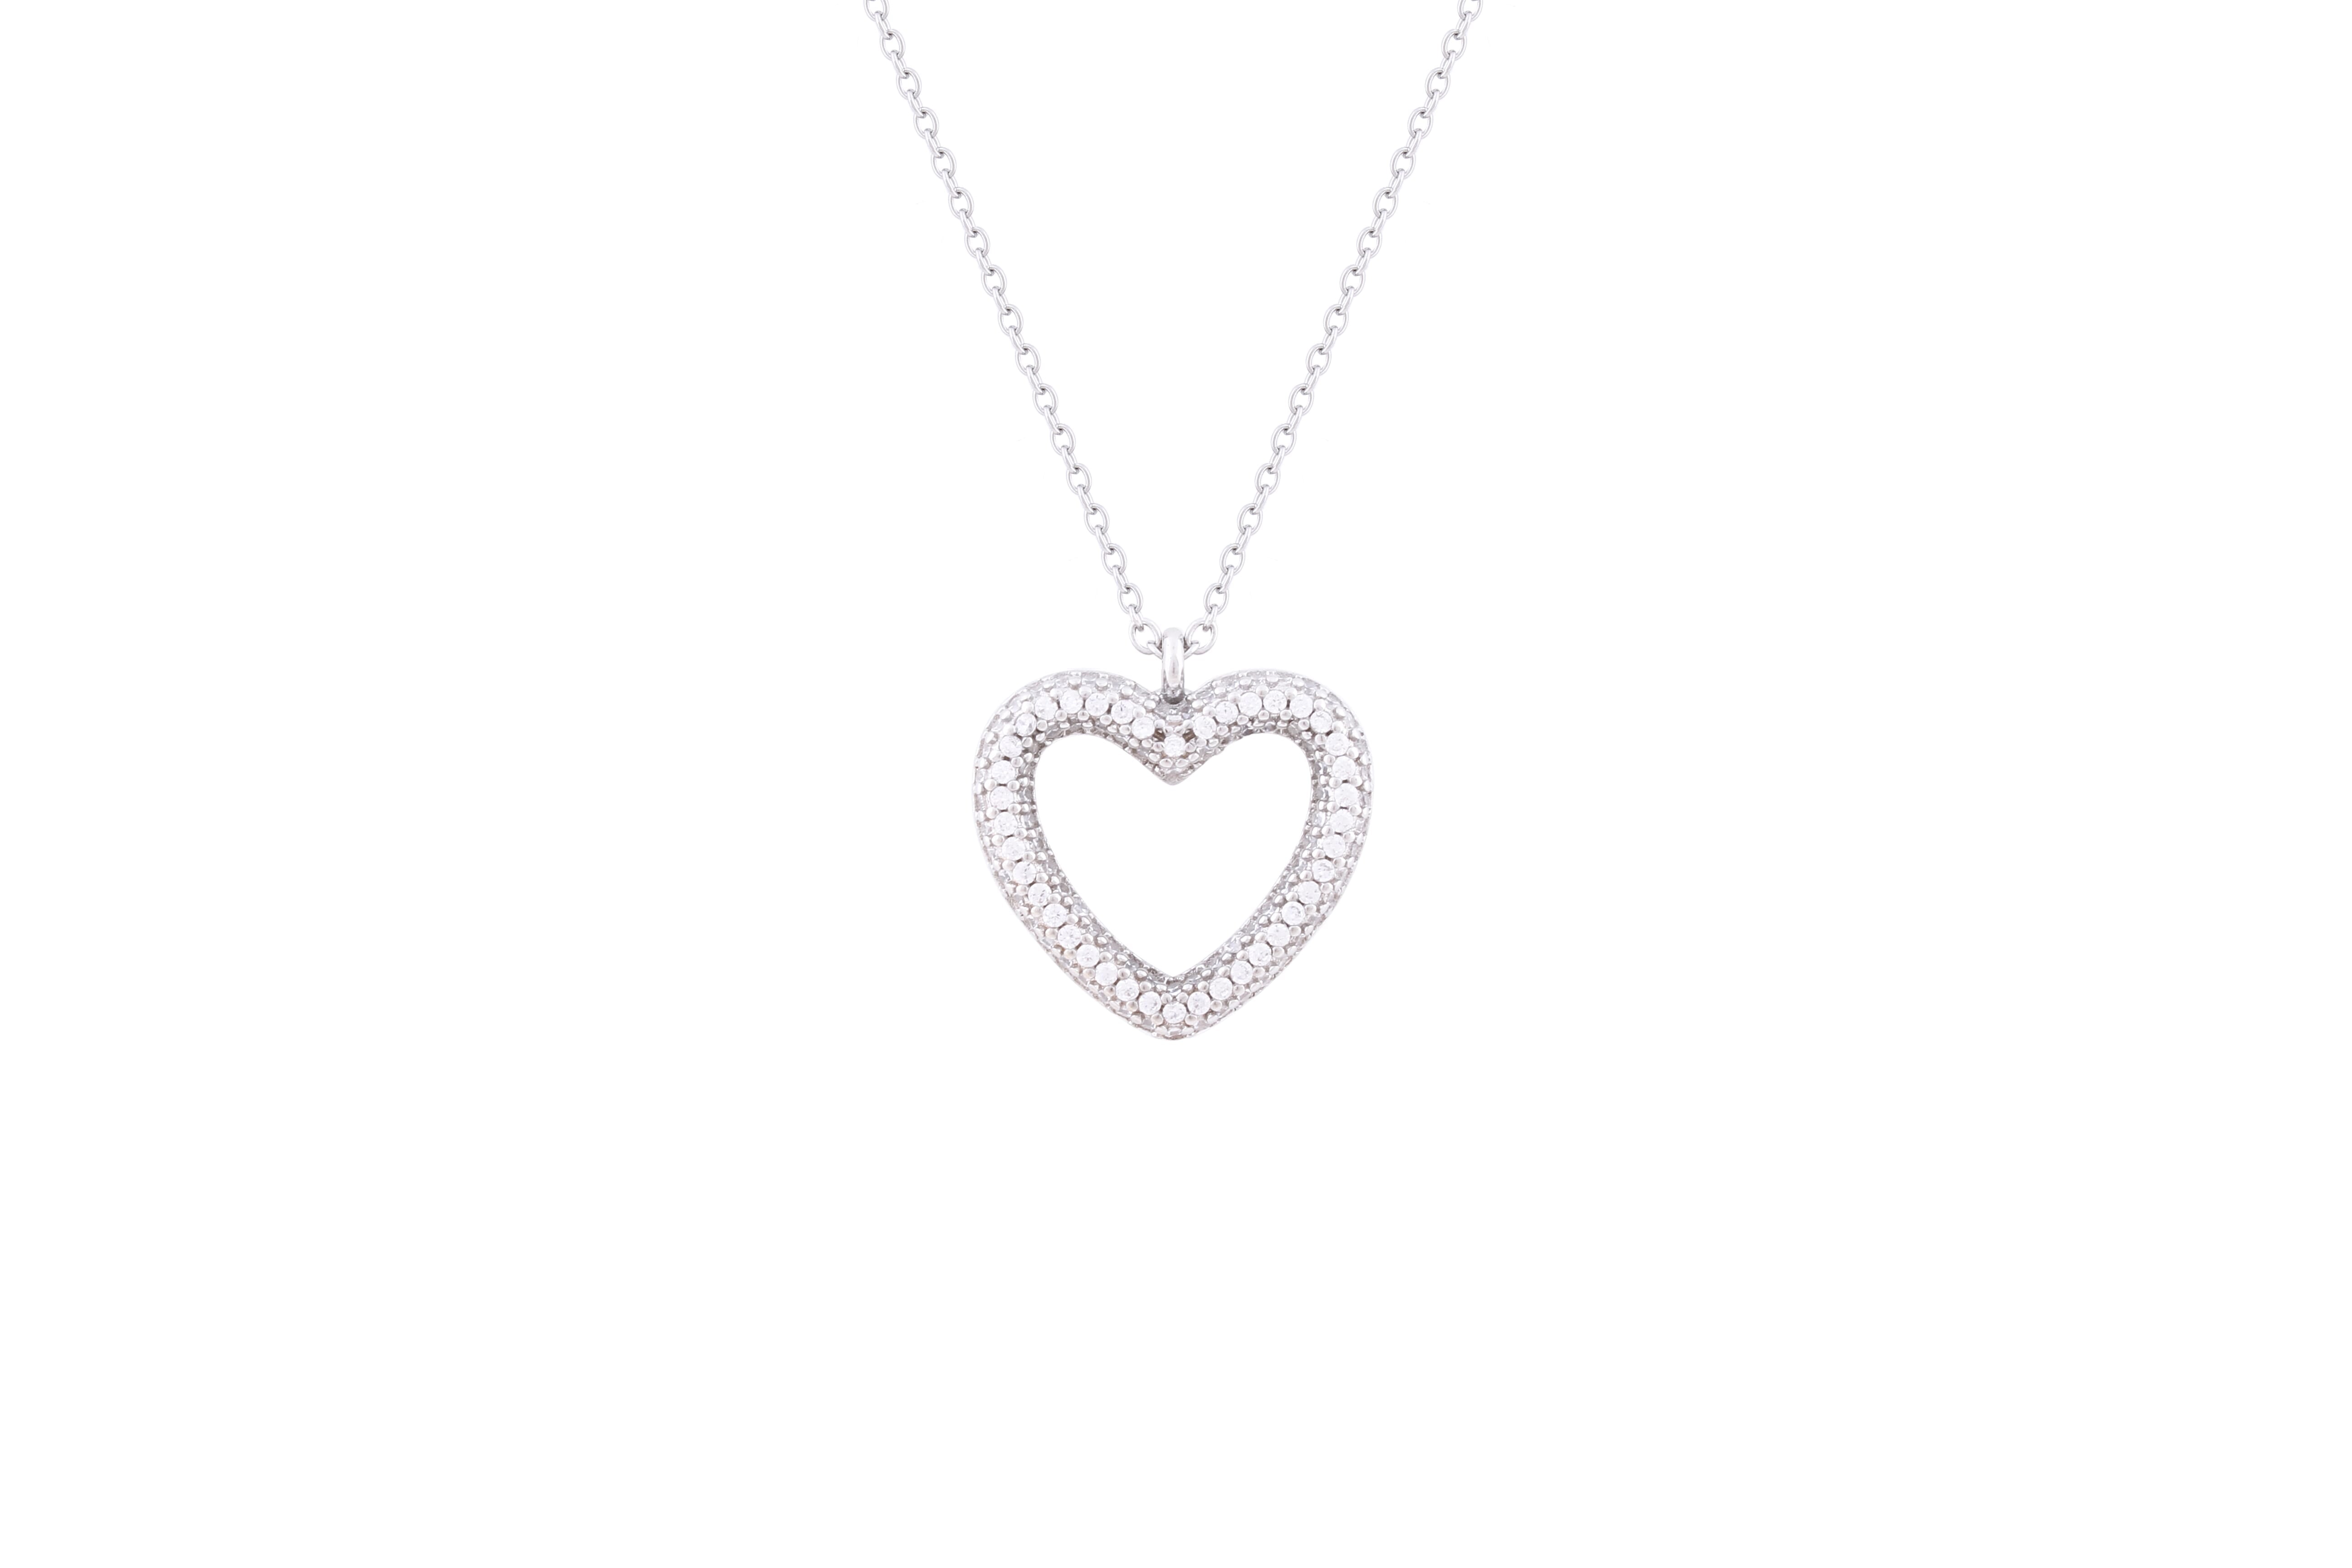 Asfour Sterling Silver Heart necklace Inlaid With Zircon Stones ND0010